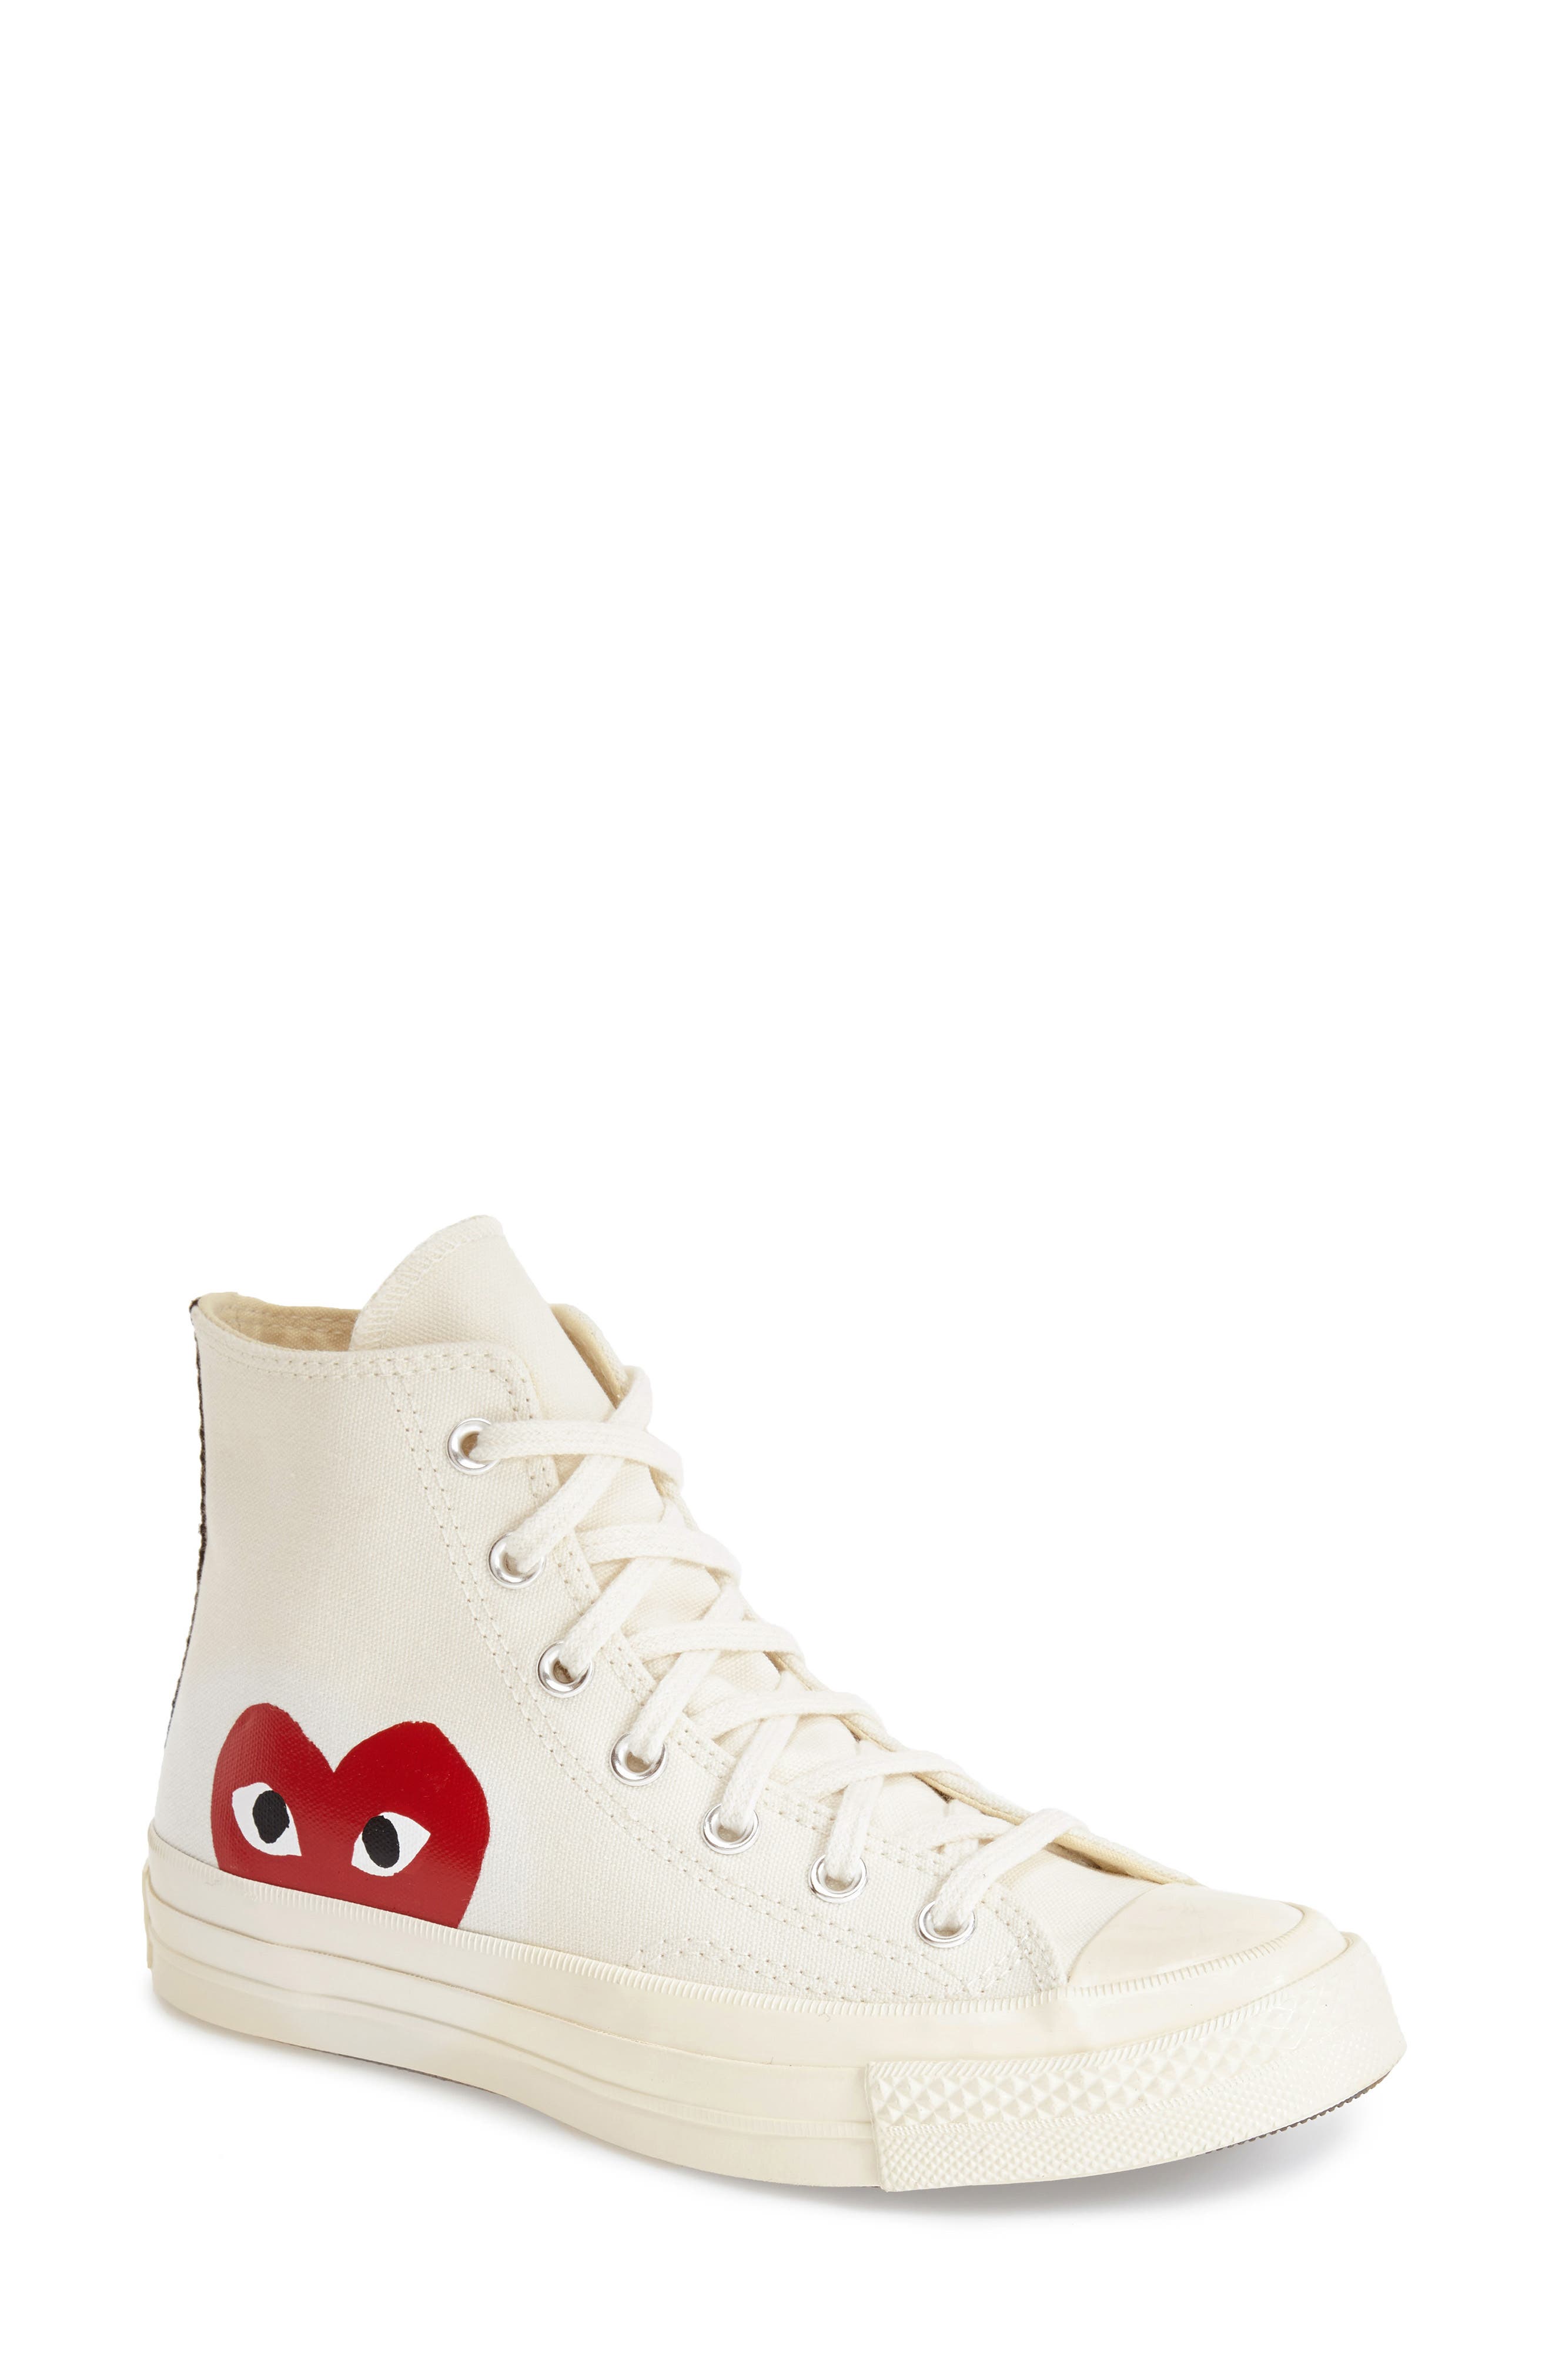 converse with heart eyes Shop Clothing 